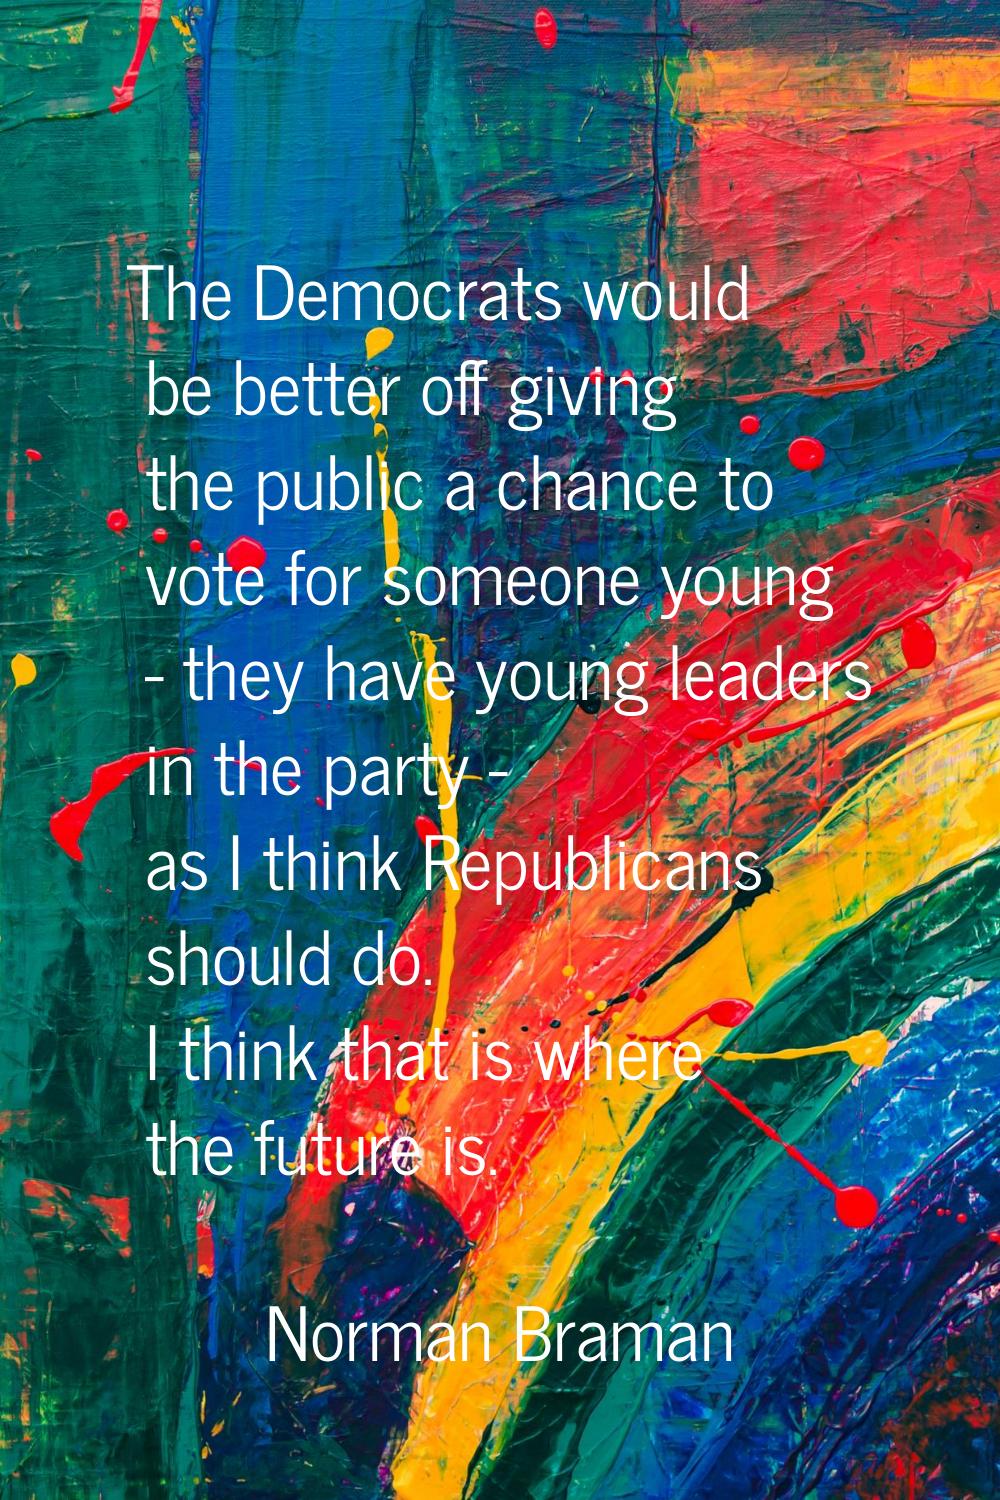 The Democrats would be better off giving the public a chance to vote for someone young - they have 